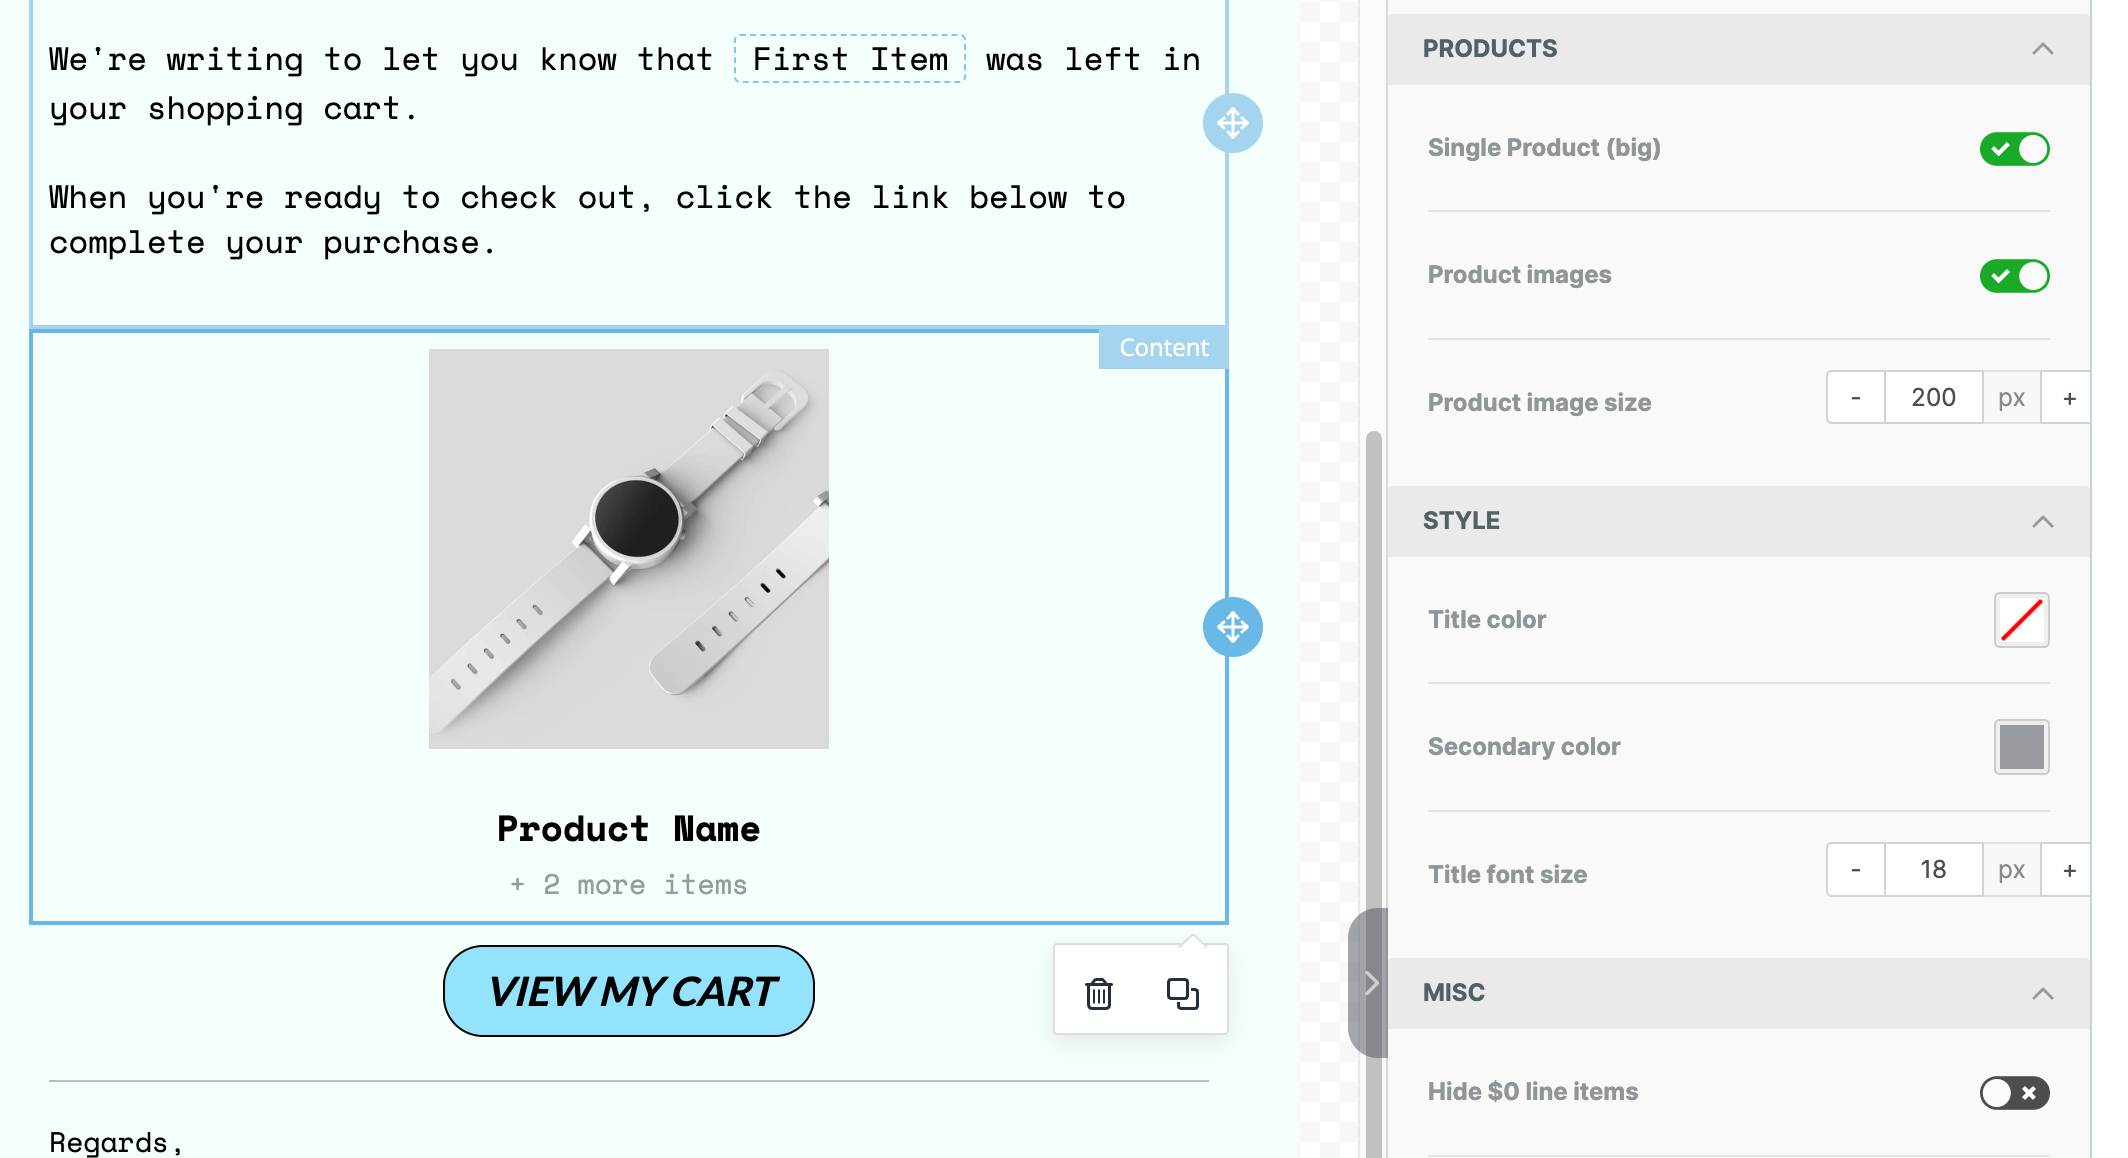 The cart tool for an abandoned cart email design.